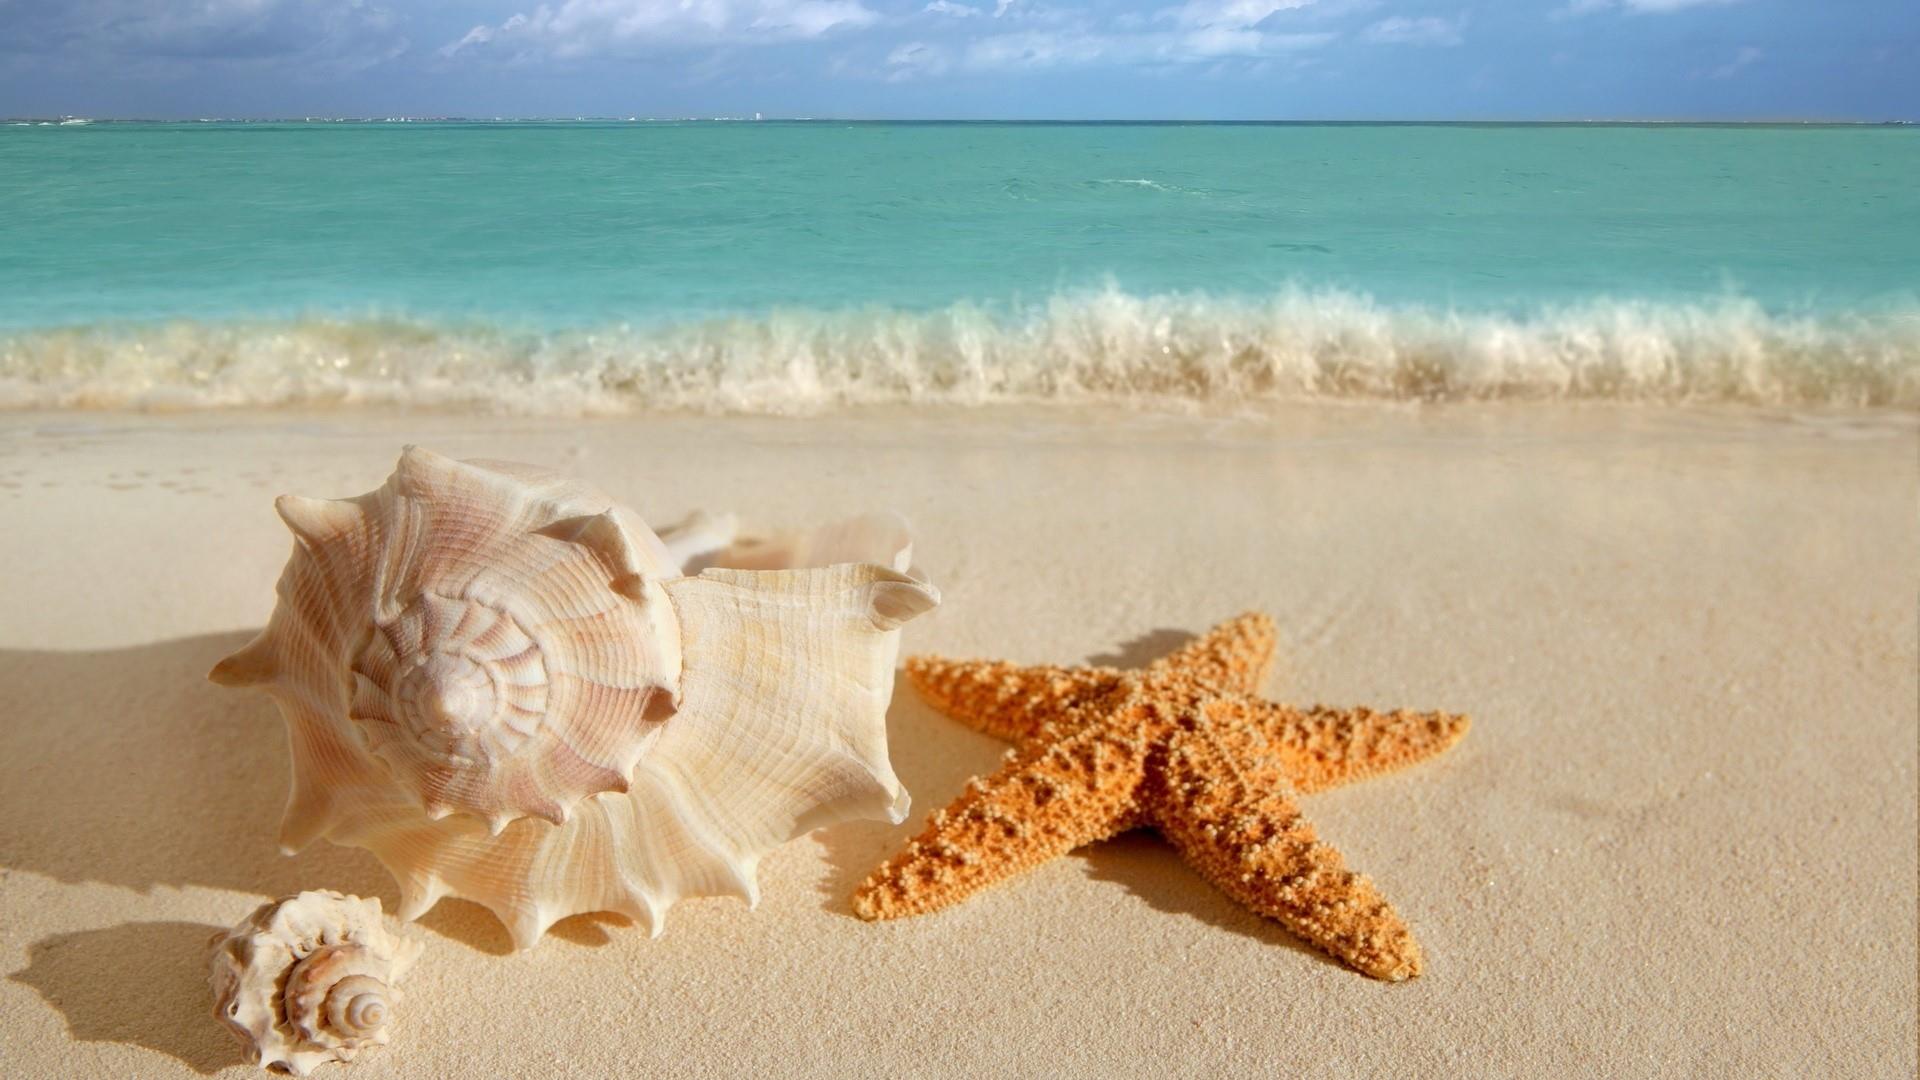 Snail Shell And Starfish On The Sandy Beach Wallpaper | Wallpaper ...